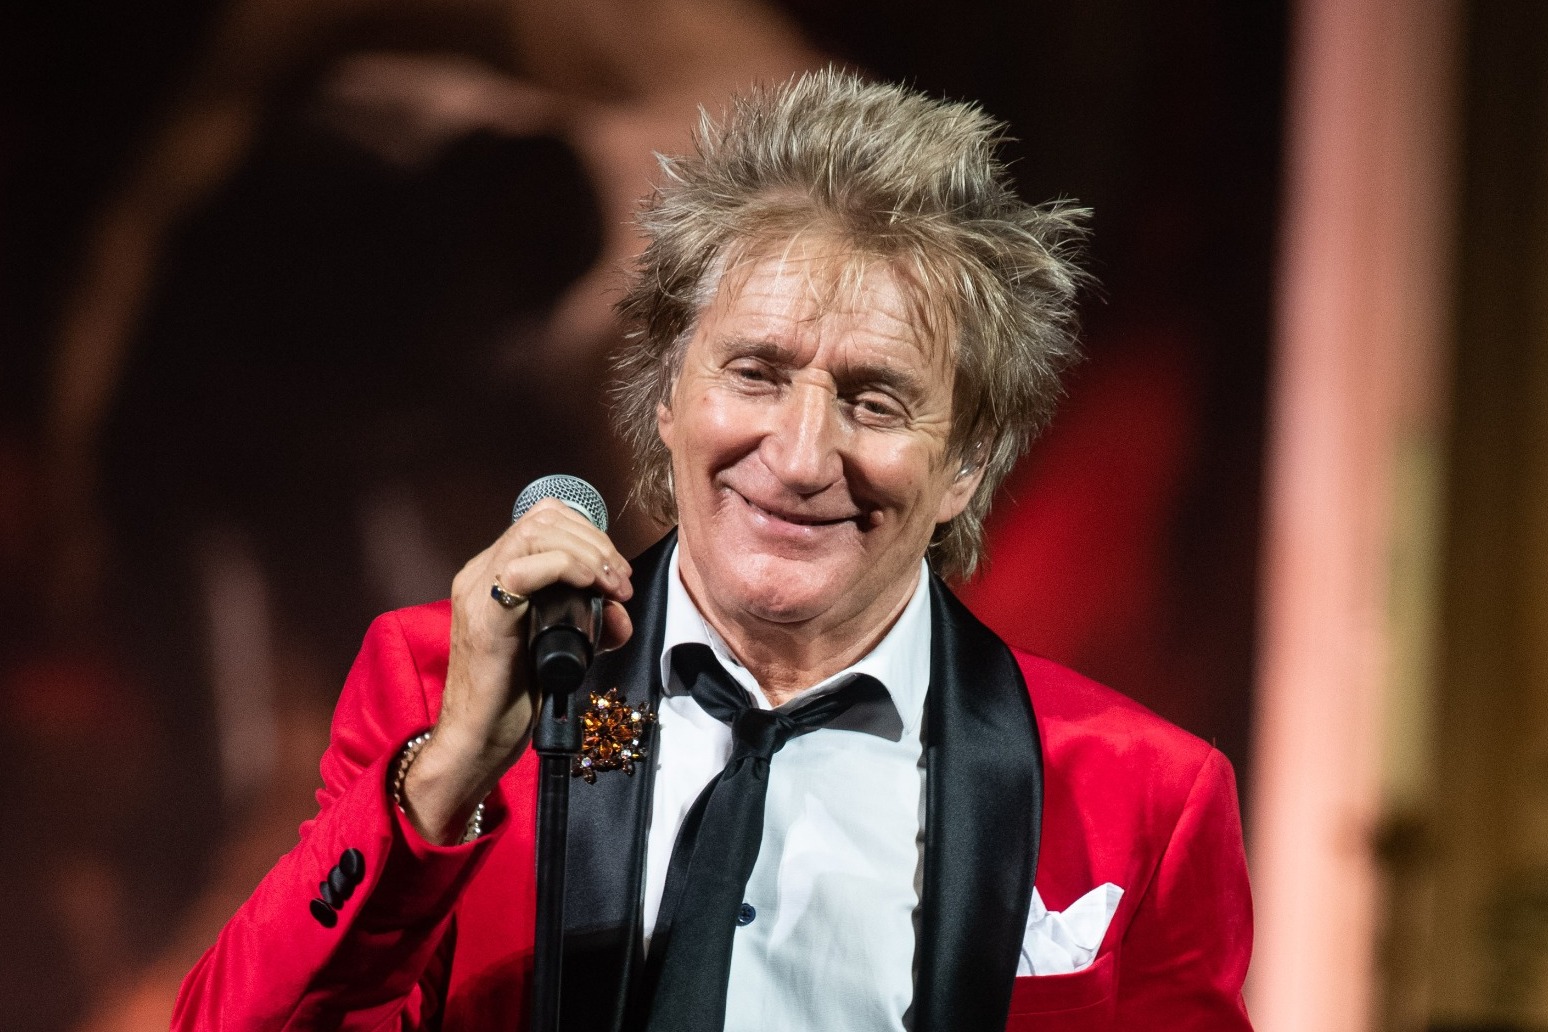 Rod Stewart and son plead guilty in US hotel assault case 